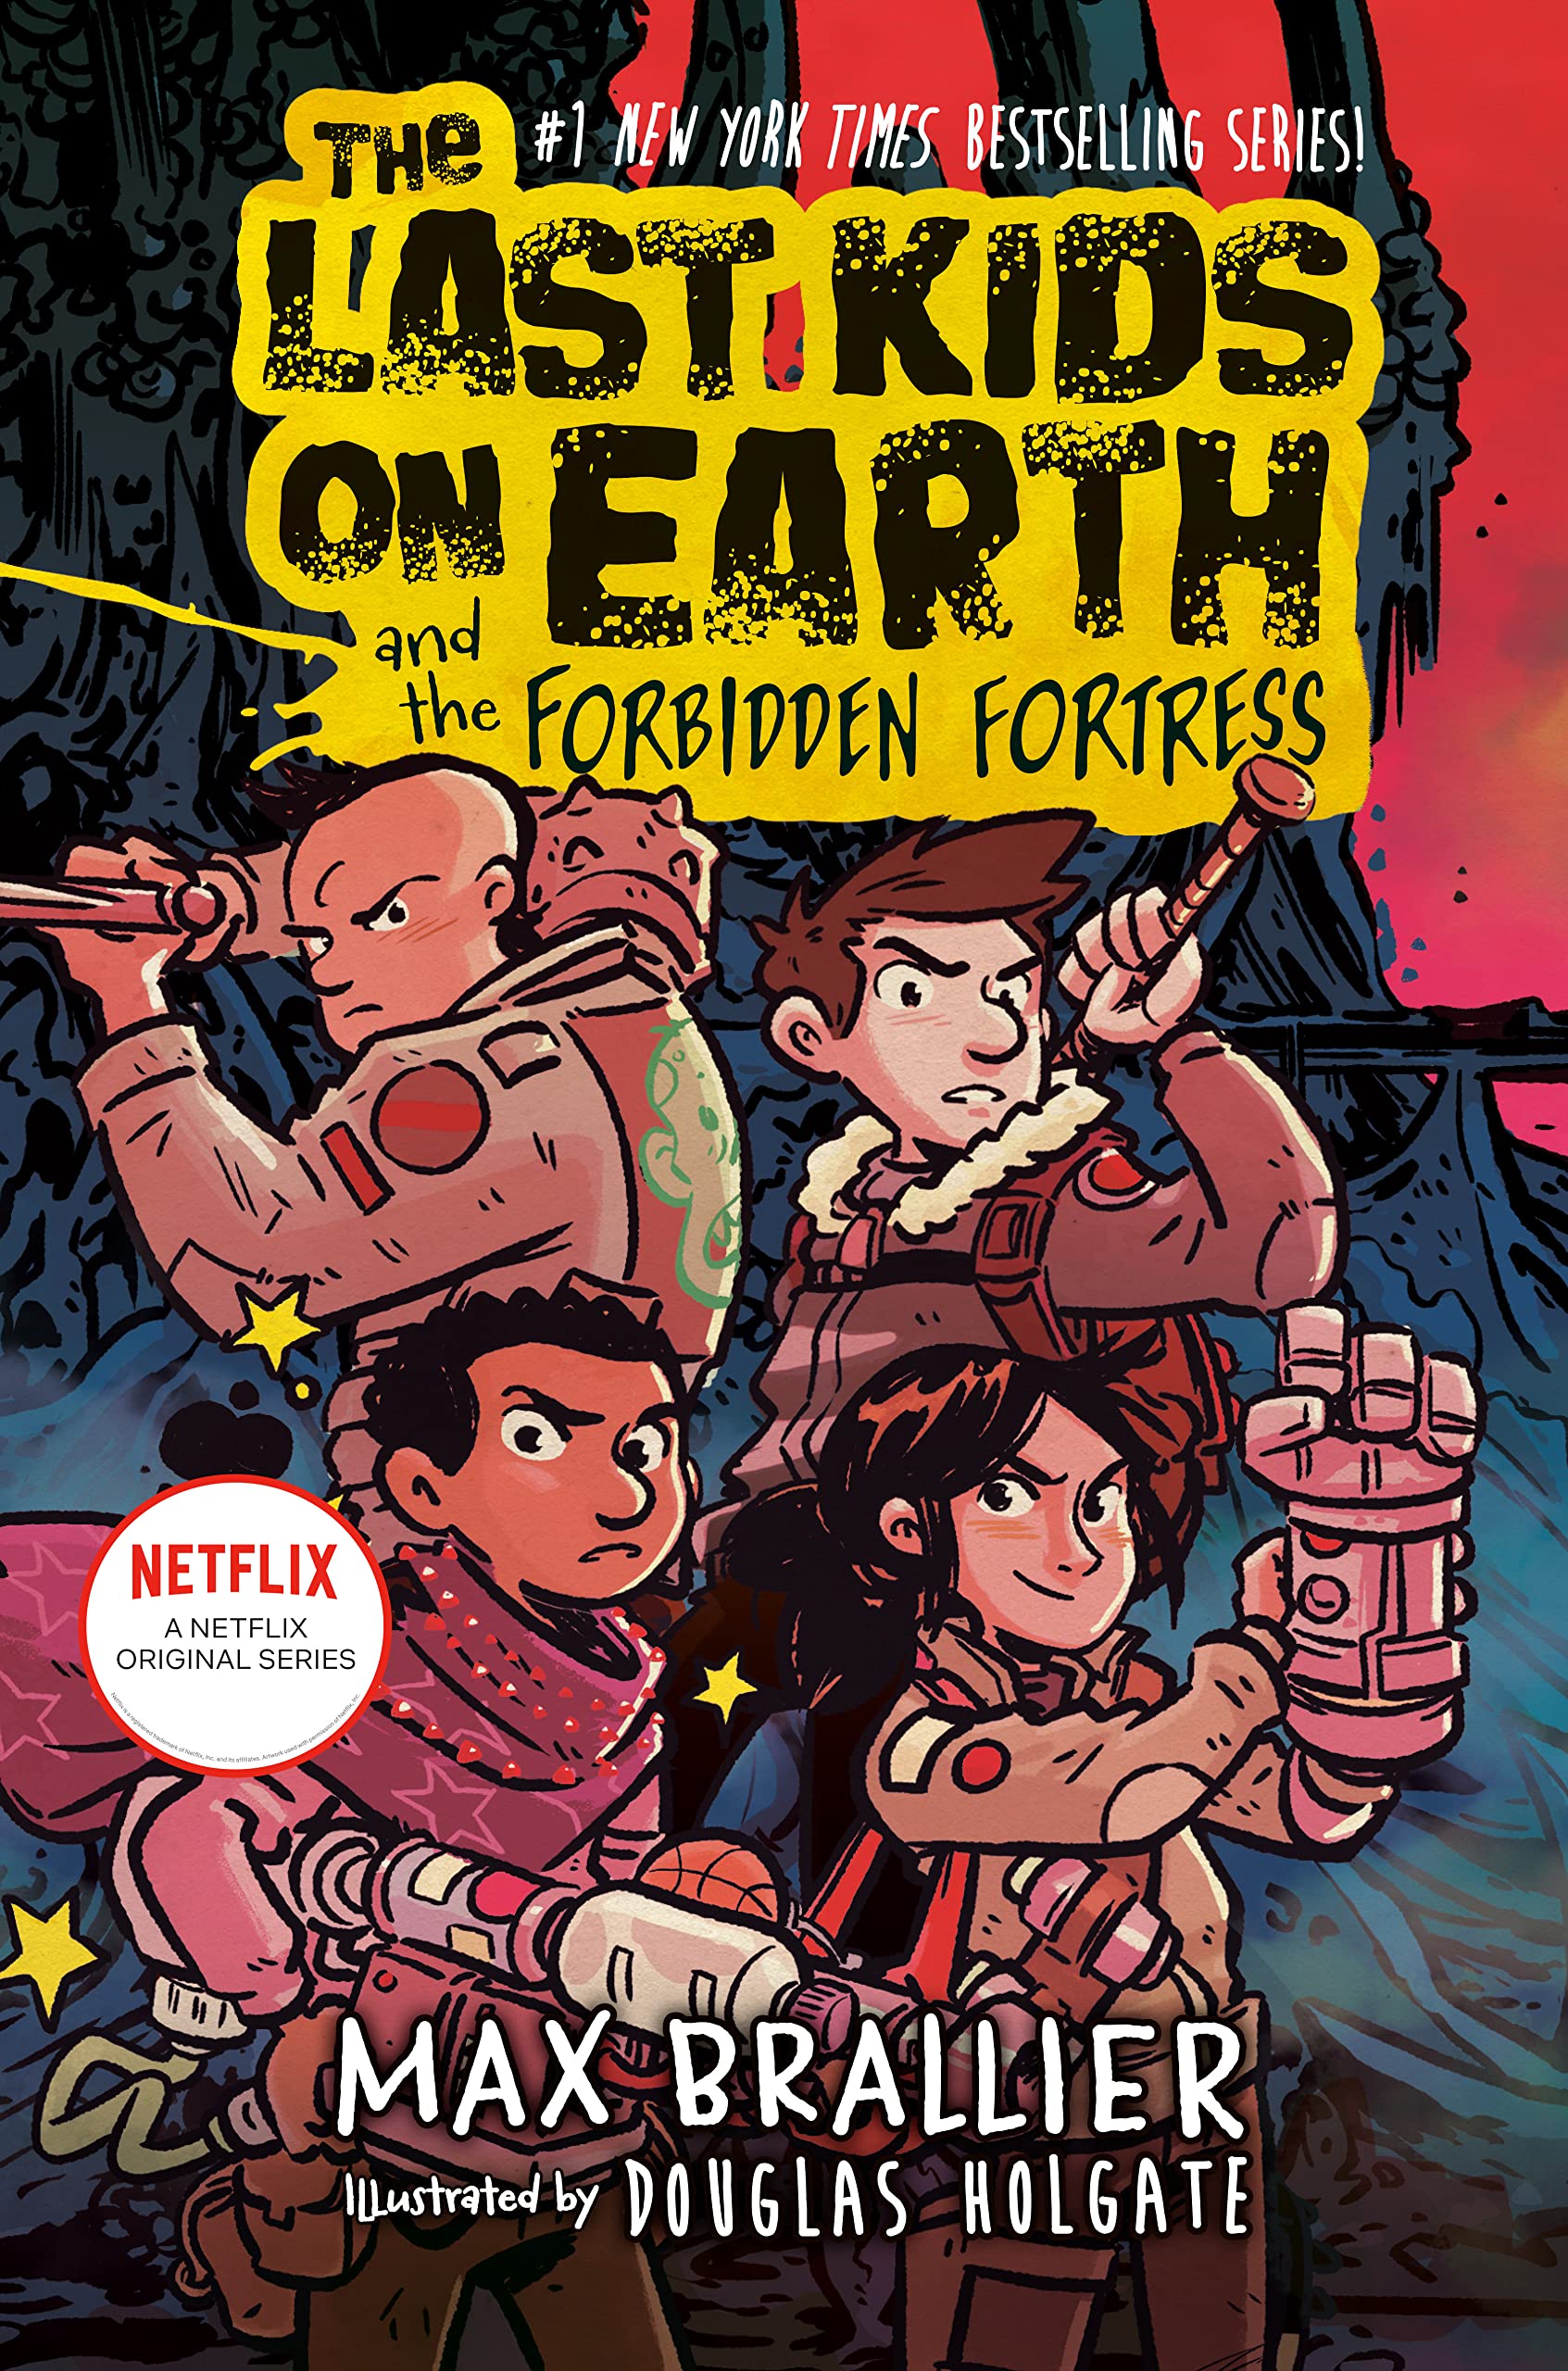 The Last Kids on Earth and the Forbidden Fortress (The Last Kids on Earth #8) by Max Brallier